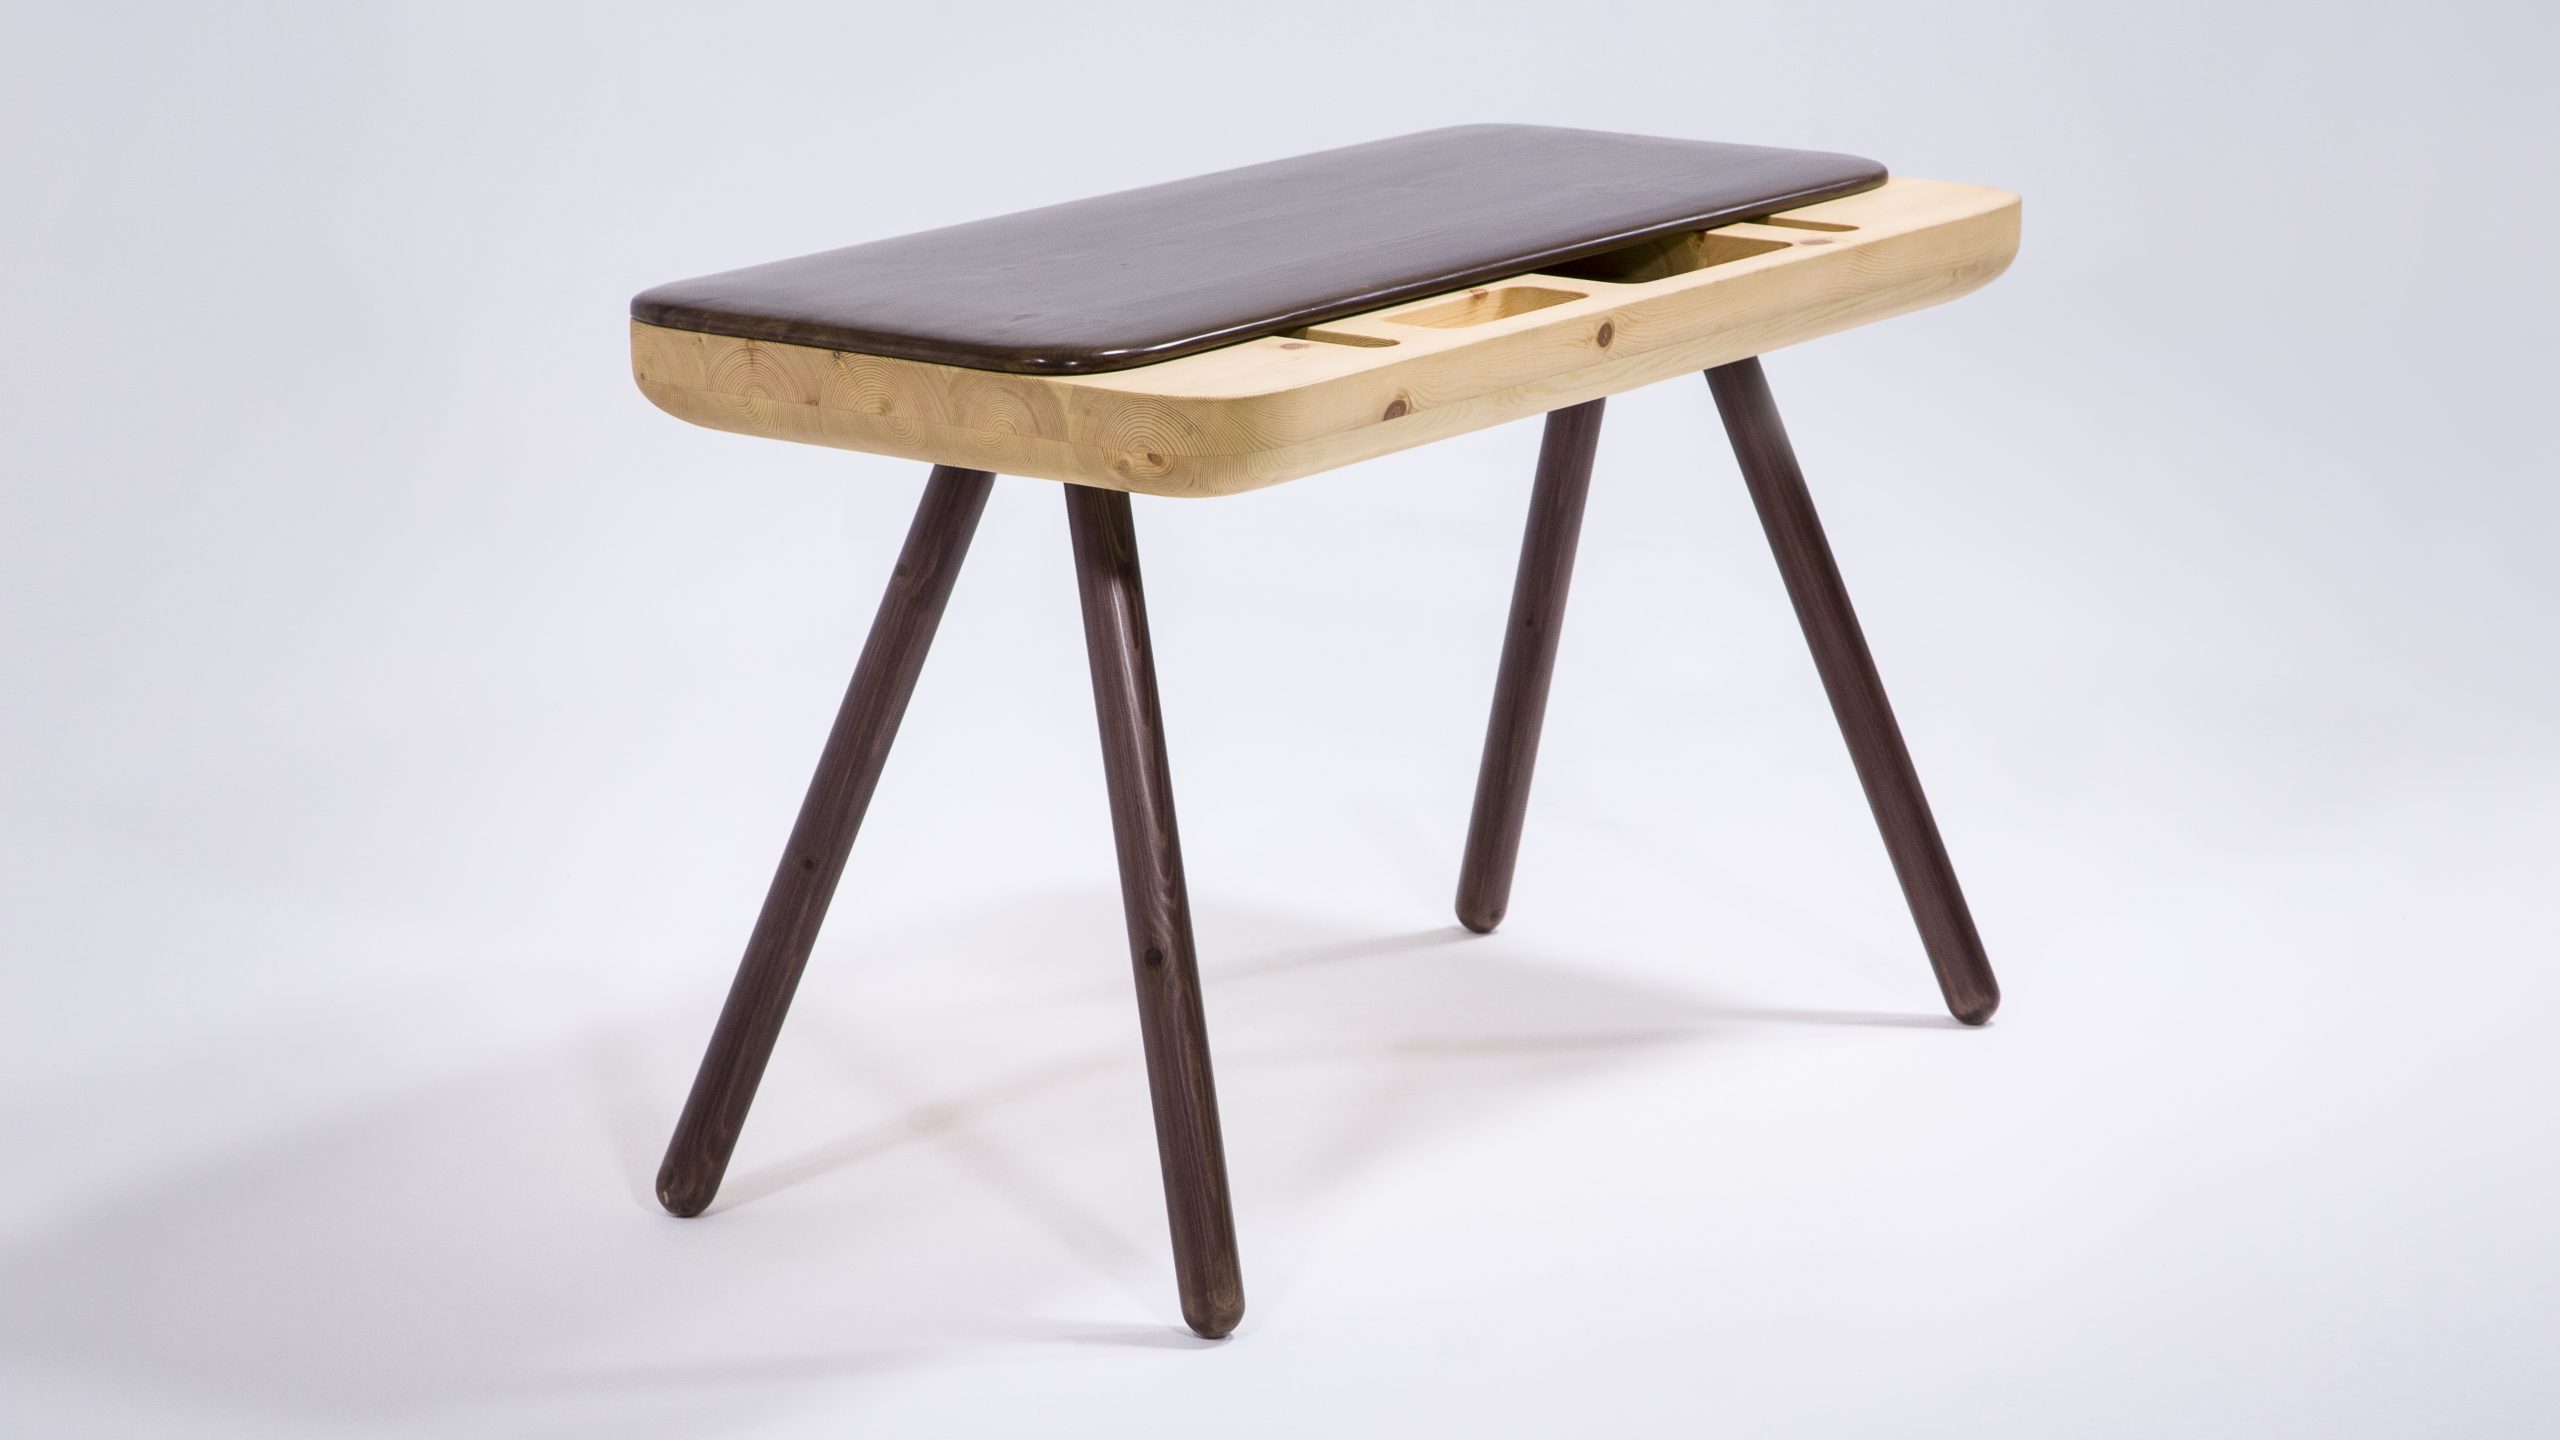 Product photograph of a designer table photographed in a studio in Shanghai - photo by photographer Tuomas Harjumaaskola, China